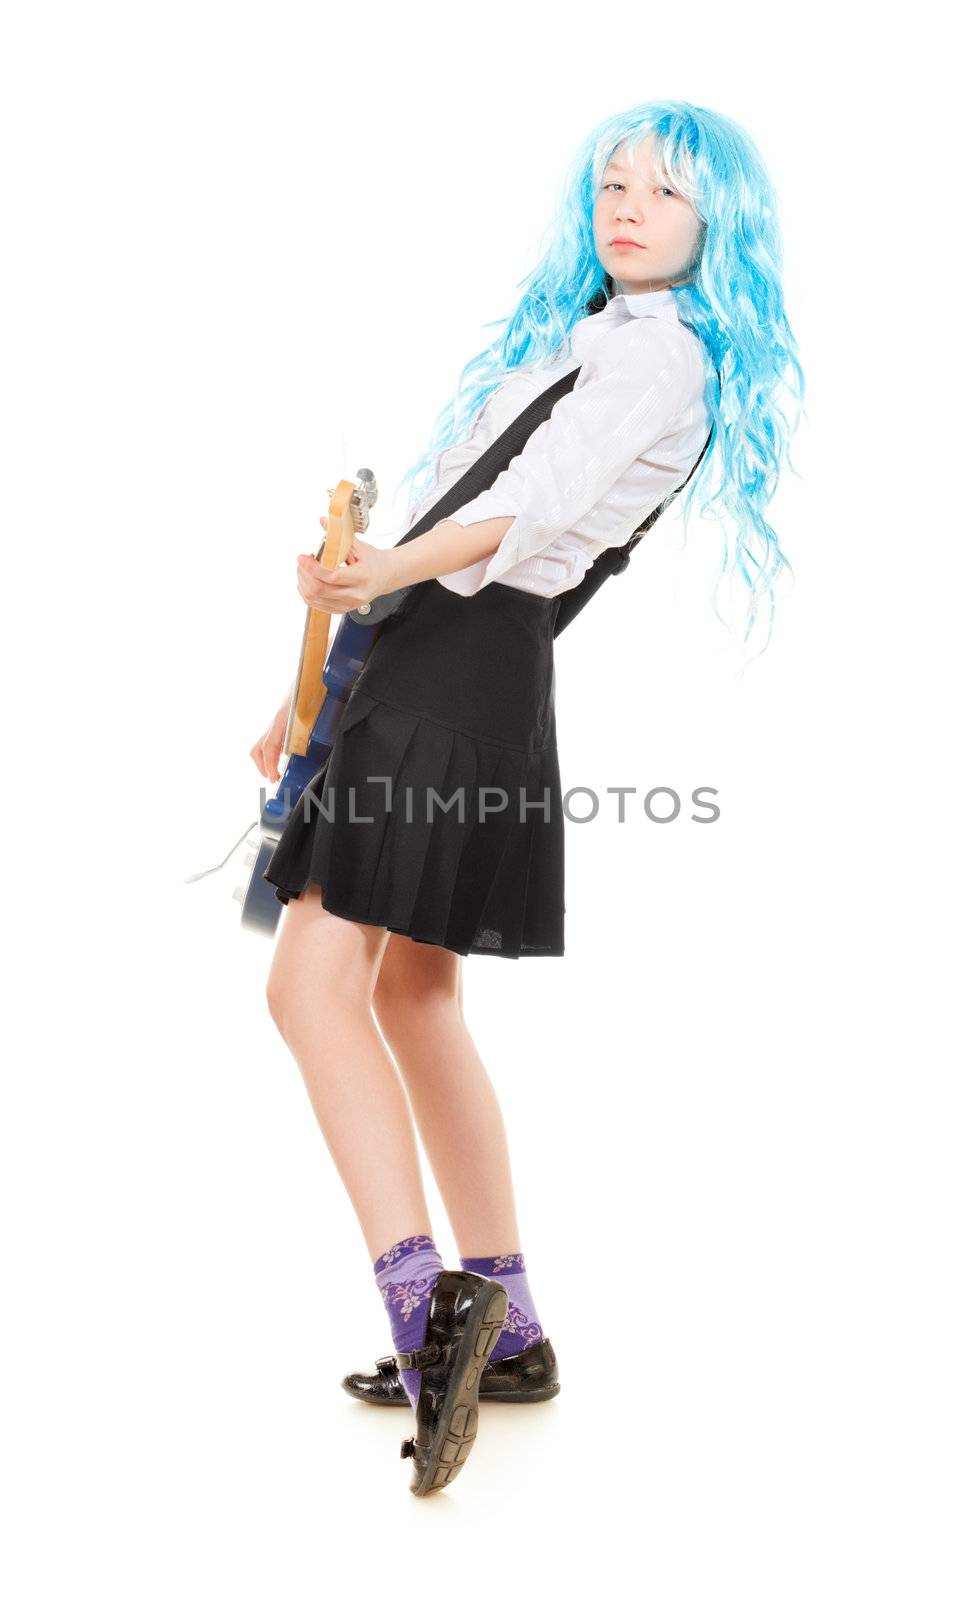 teen girl playing on a guitar, isolated on white